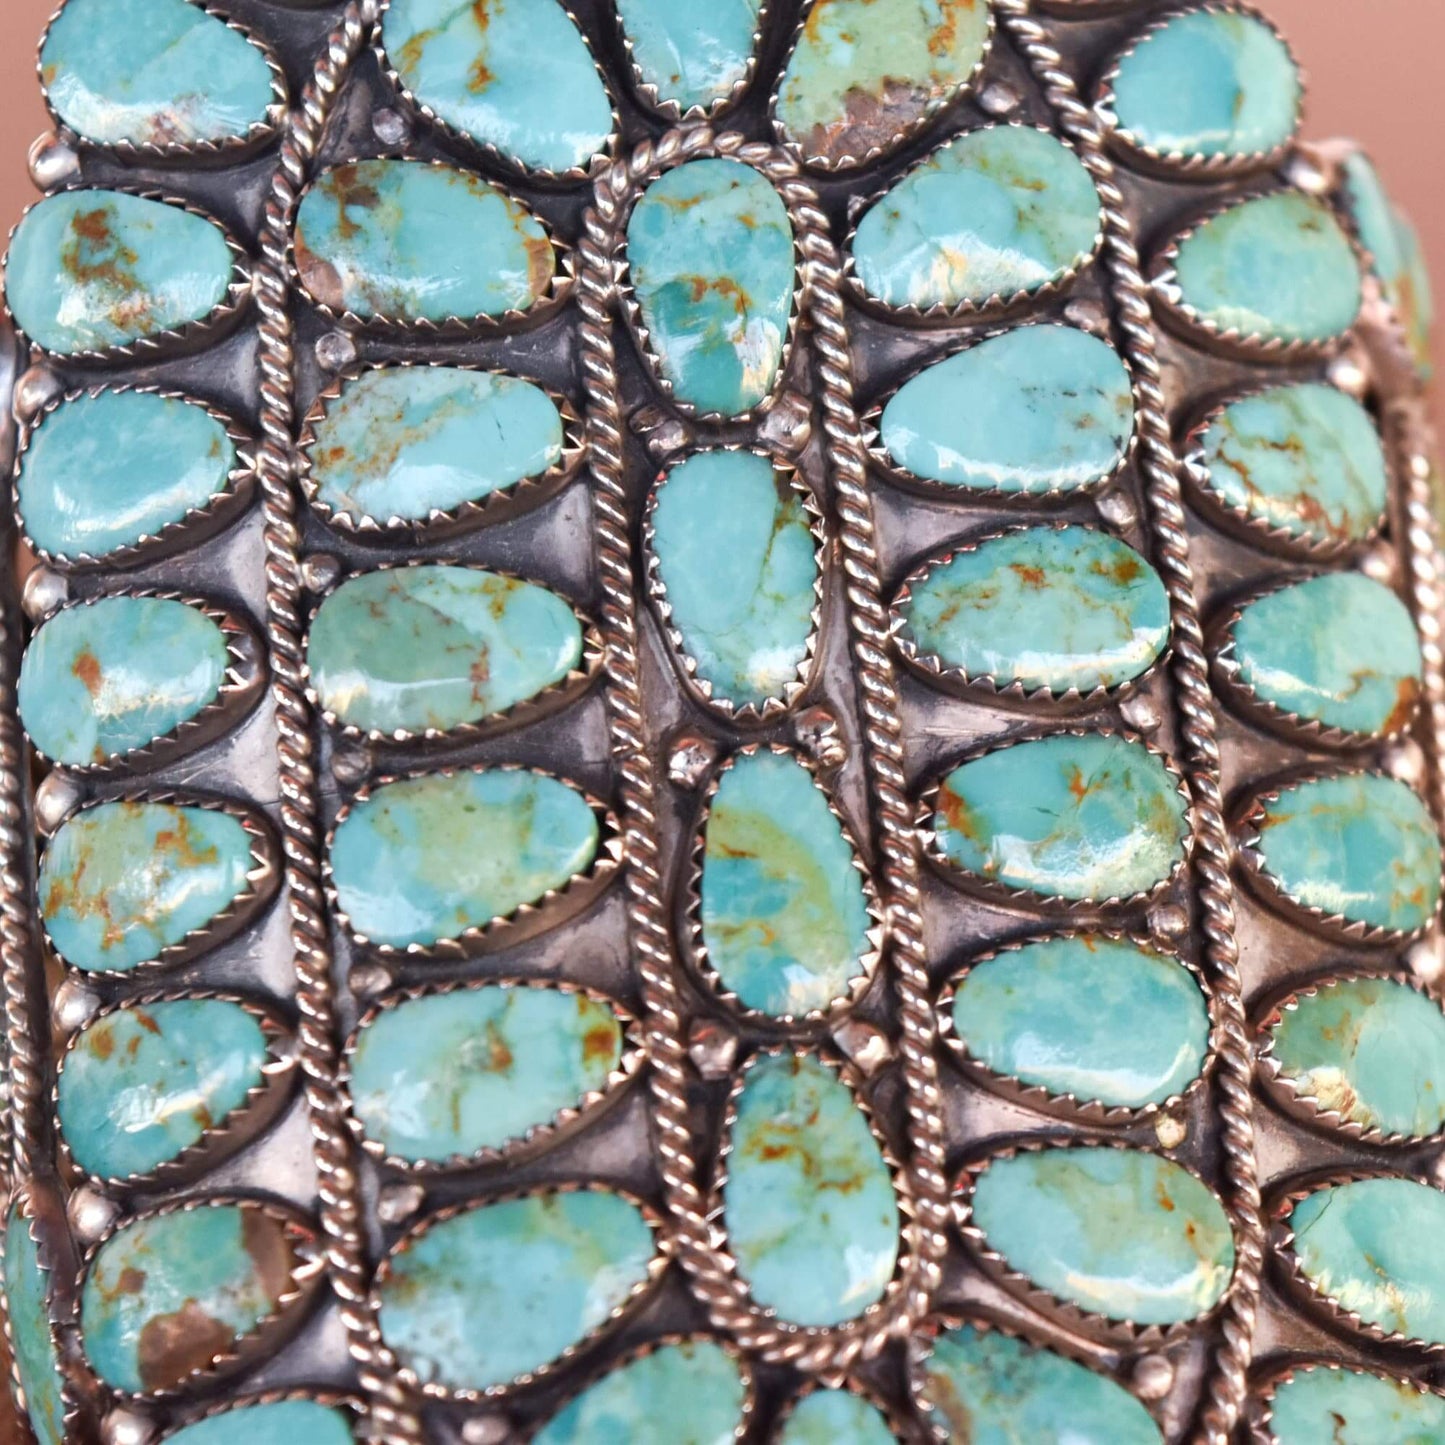 Jumbo Signed Navajo Turquoise Cuff Bracelet By Larry Moses Begaye Turquoise Mountain, 5.625"